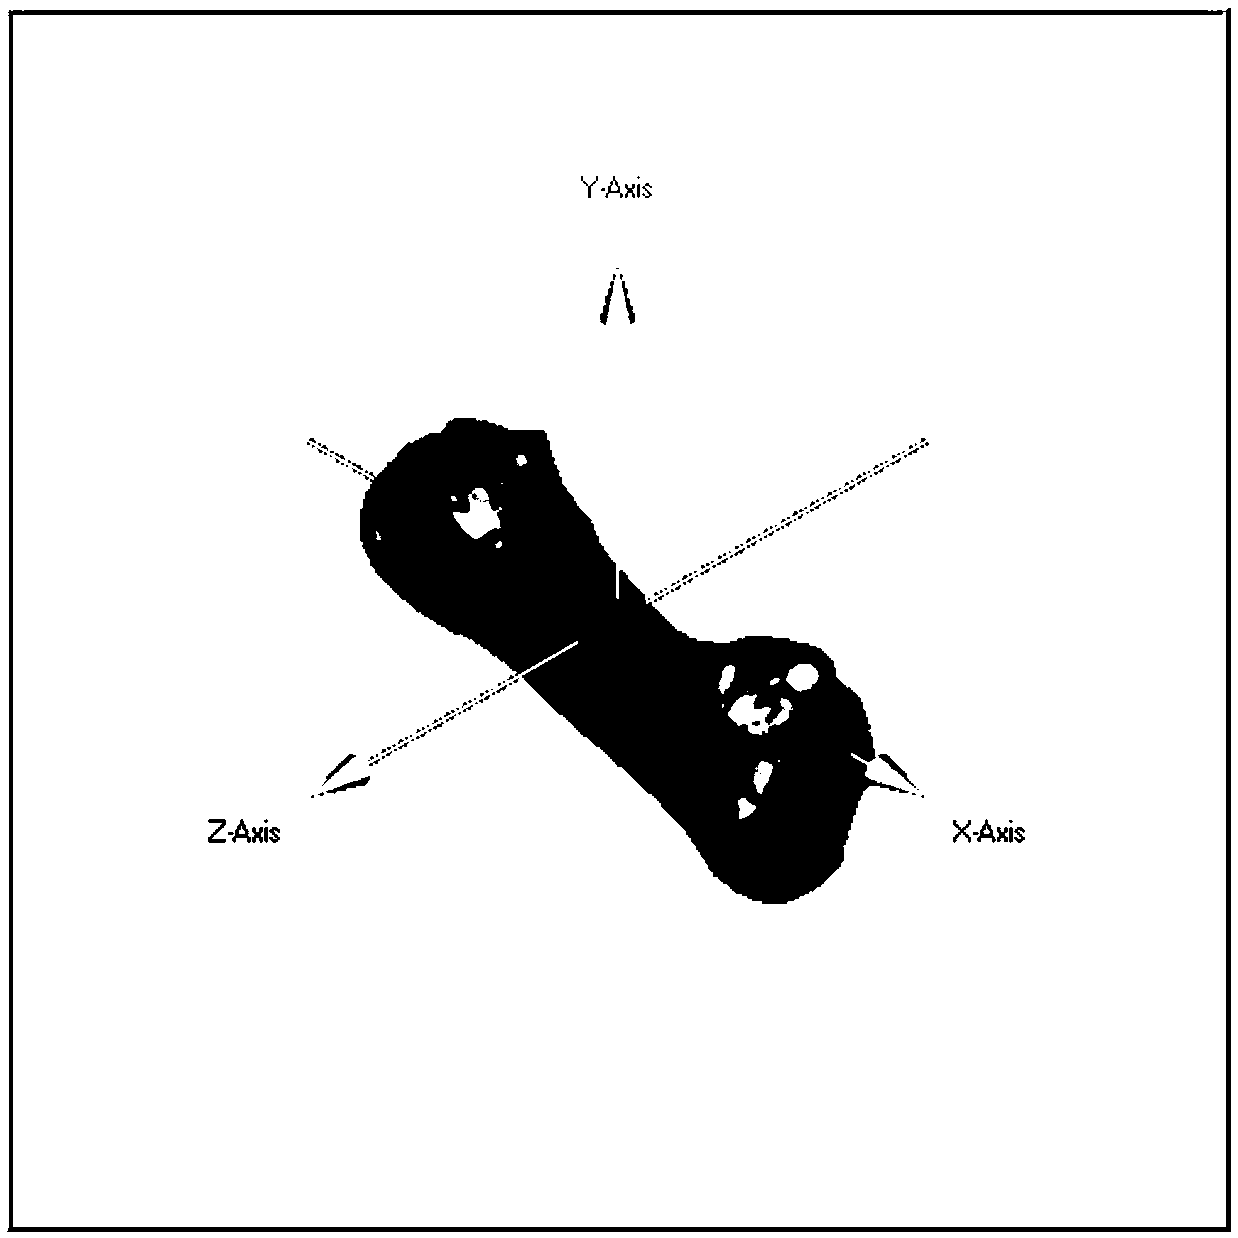 A reconstruction method of incomplete foot fossil